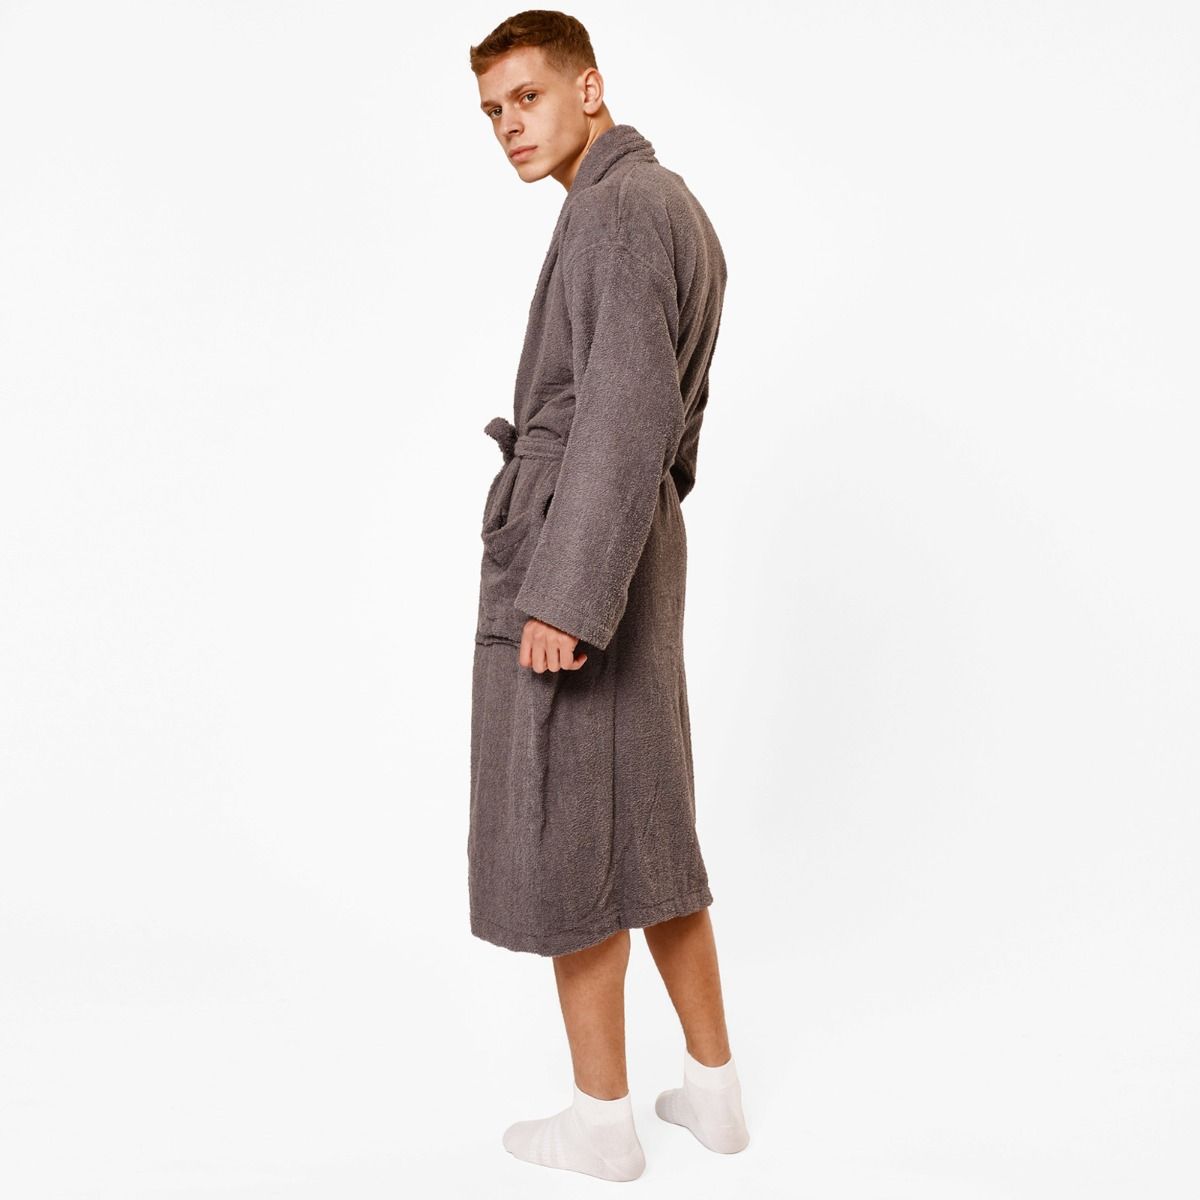 Unisex Cotton Classic Robe | Robes & Dressing Gowns | The White Company UK